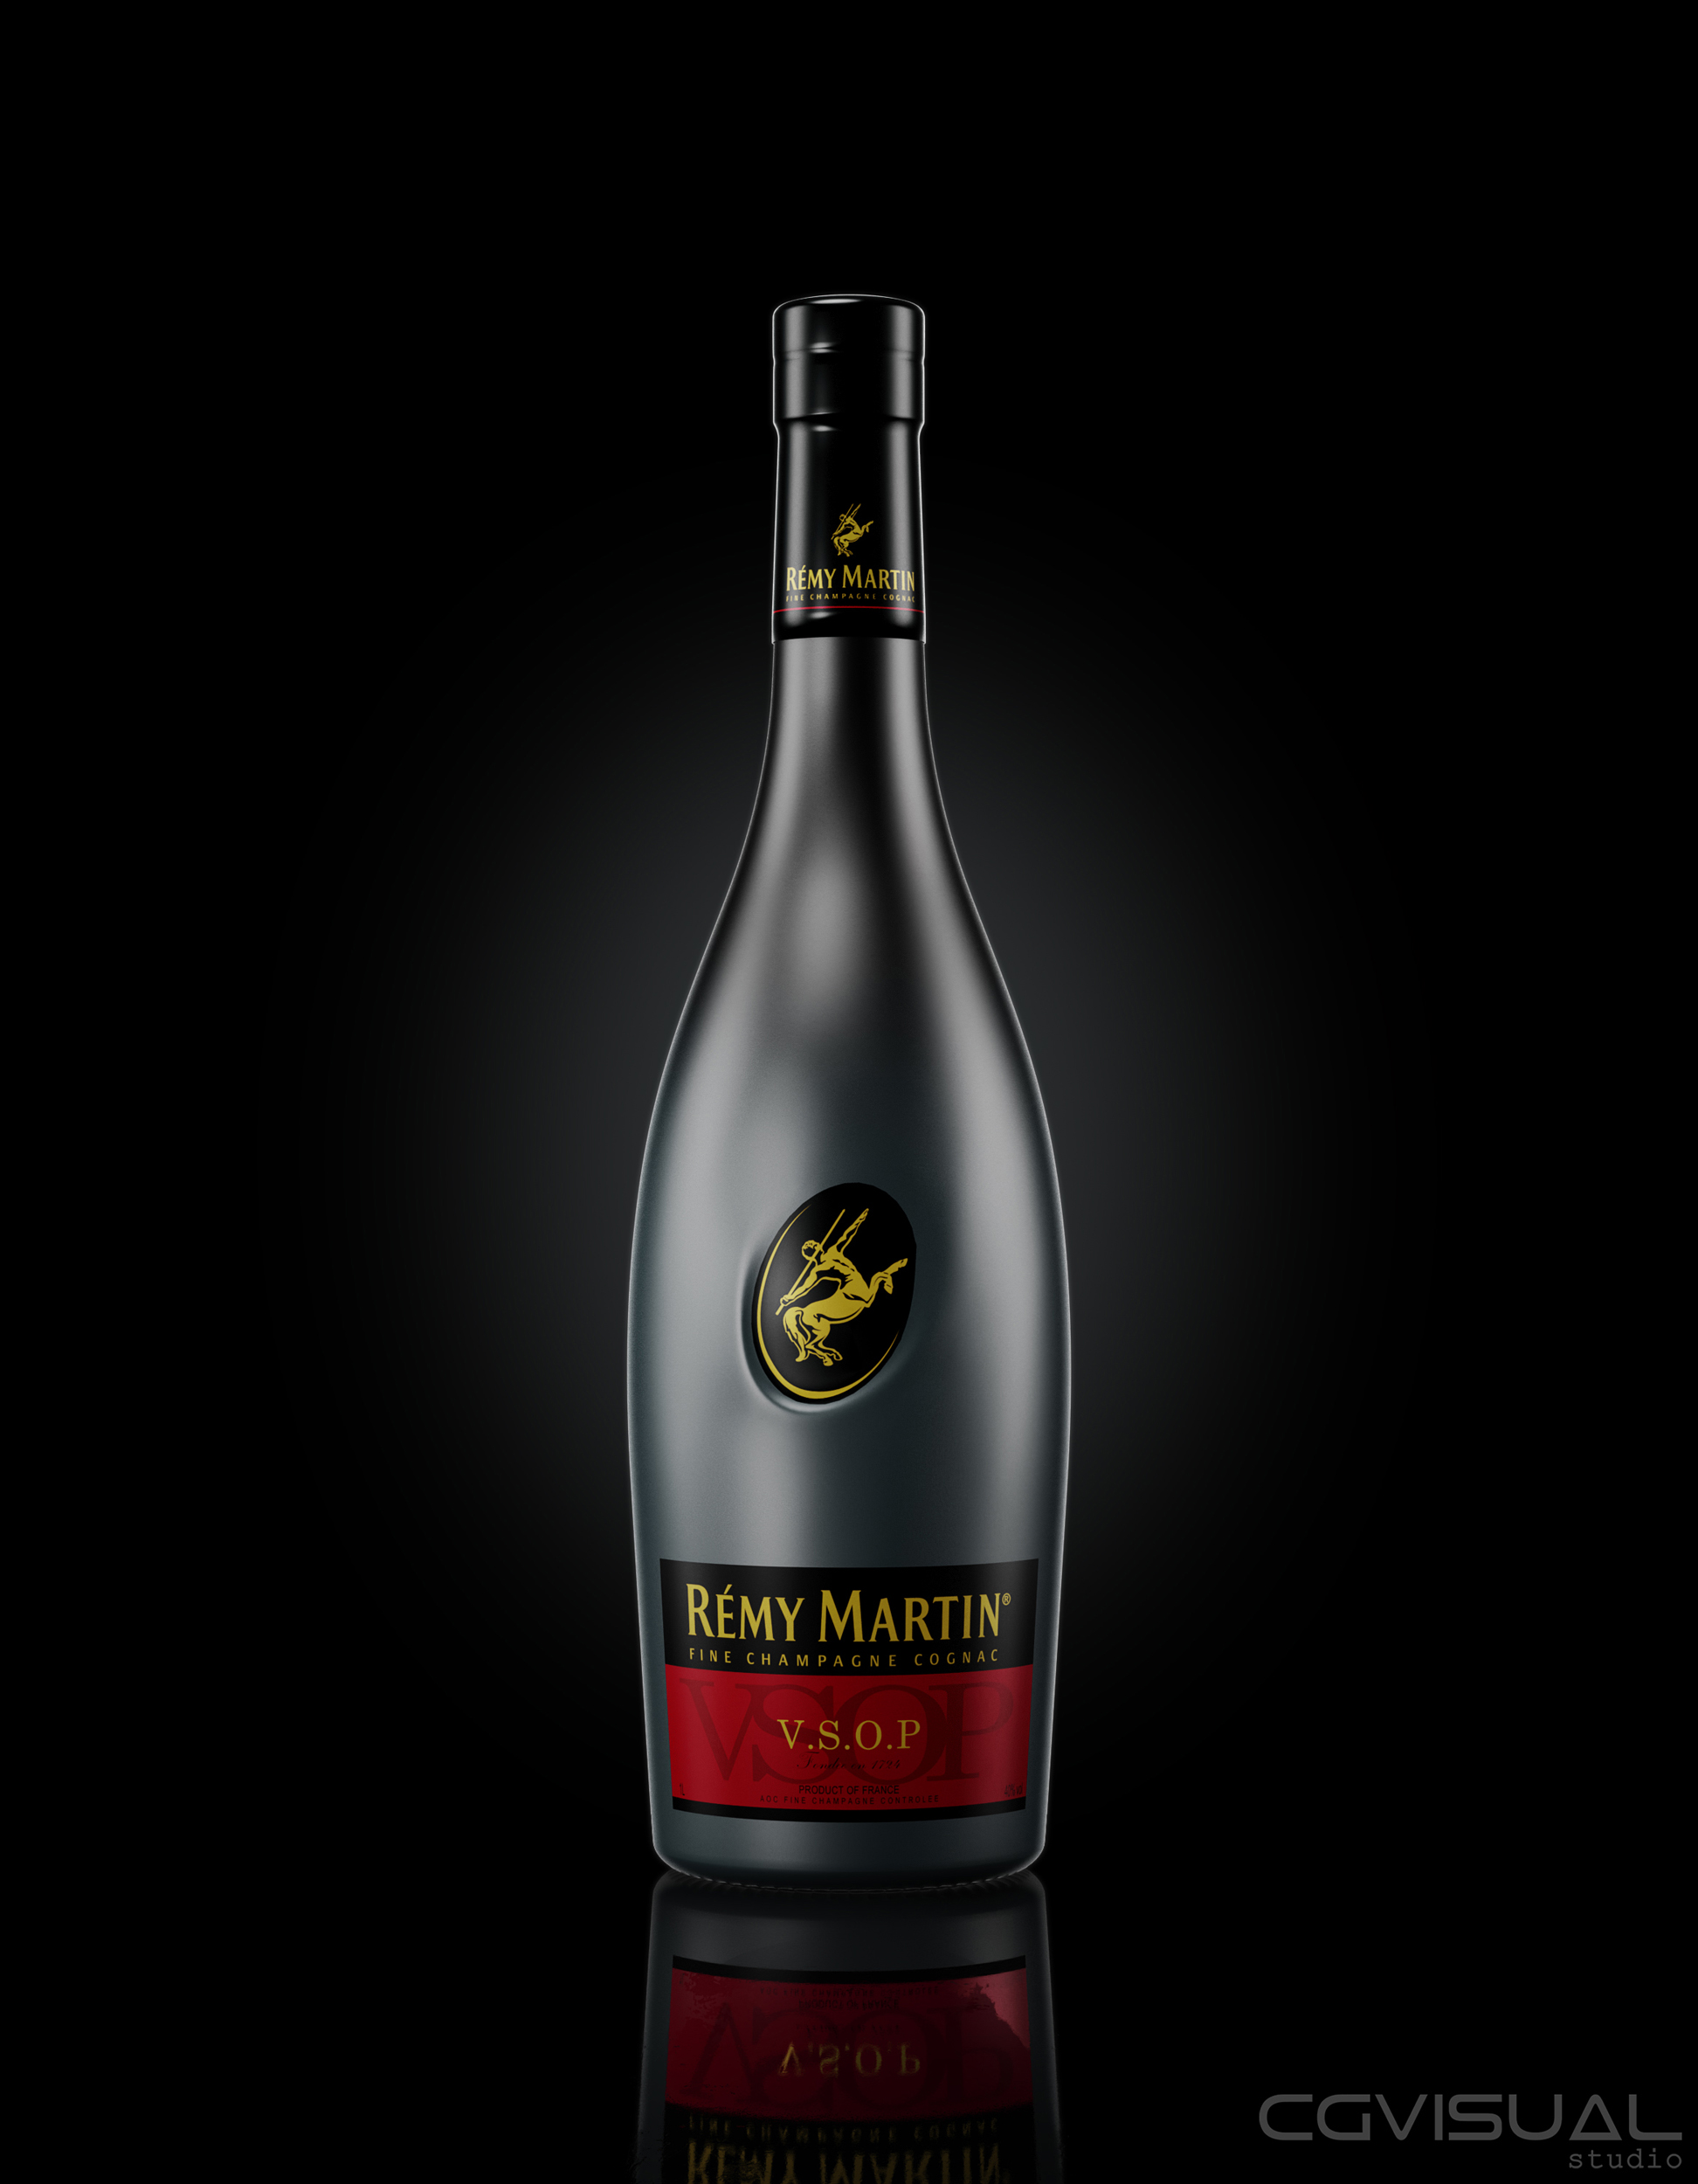 3D product visualisation of a Remy Martin bottle.